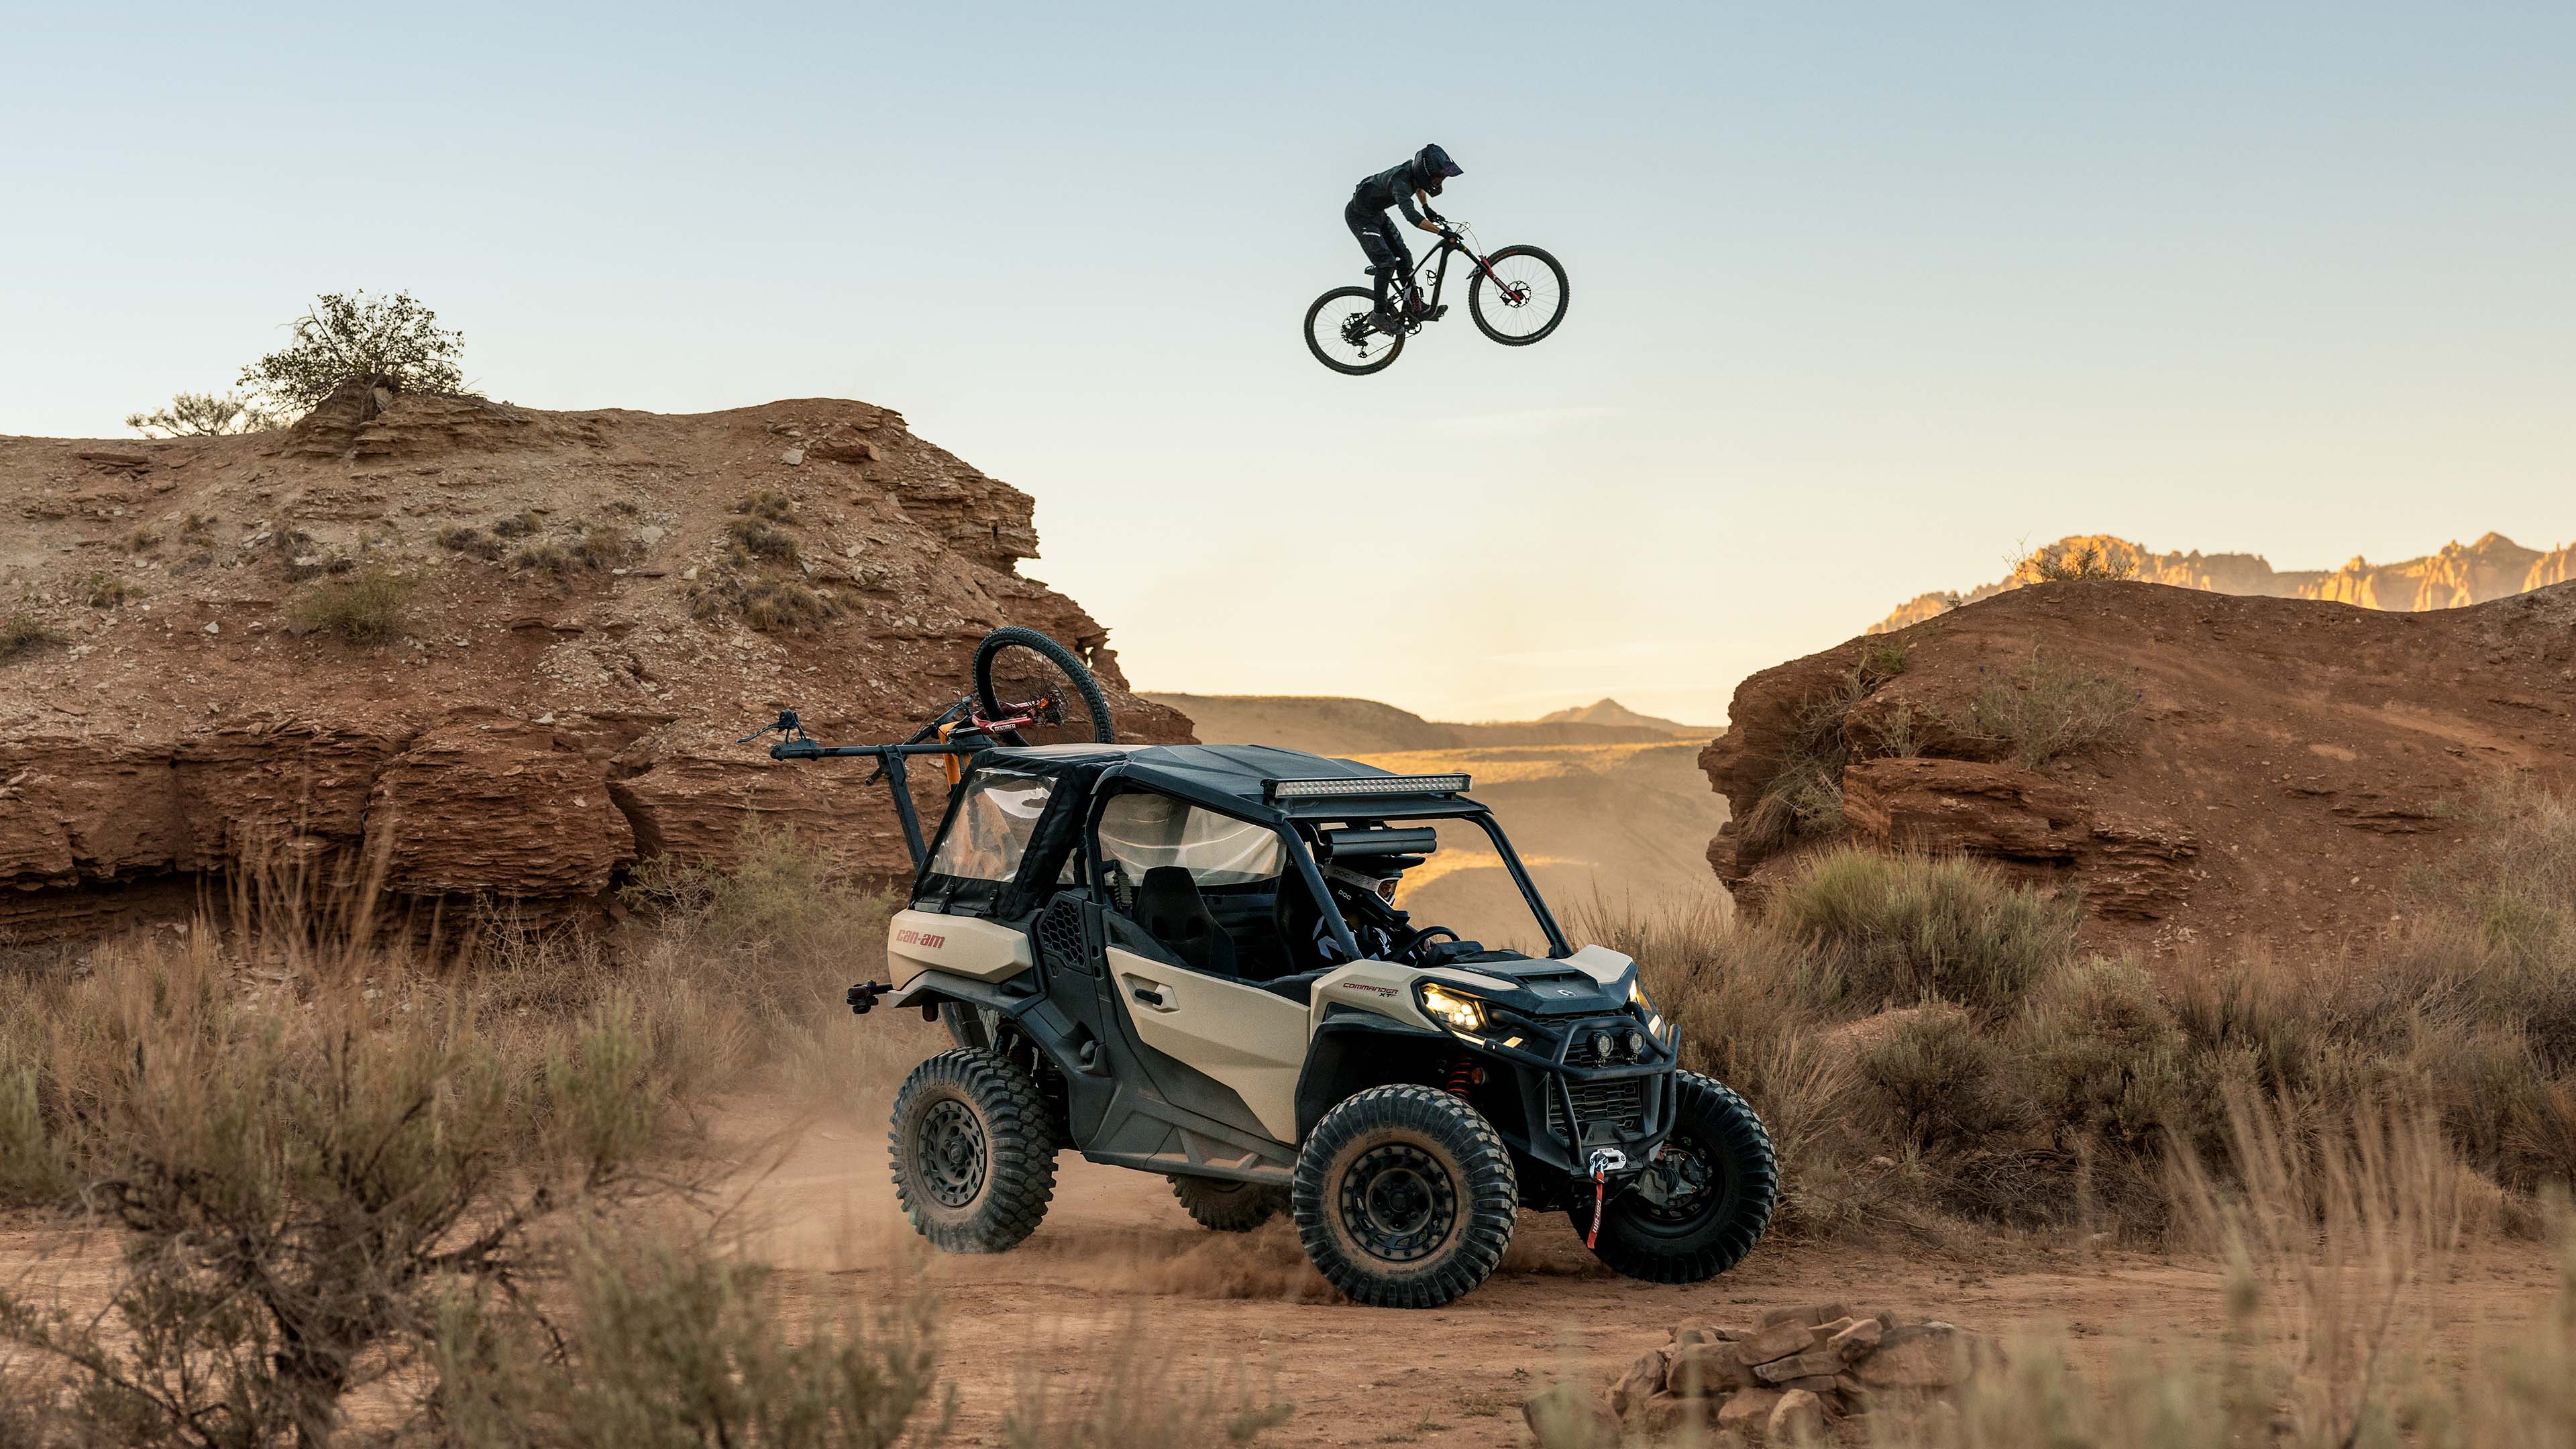 Cyclist soars over Can-Am vehicle